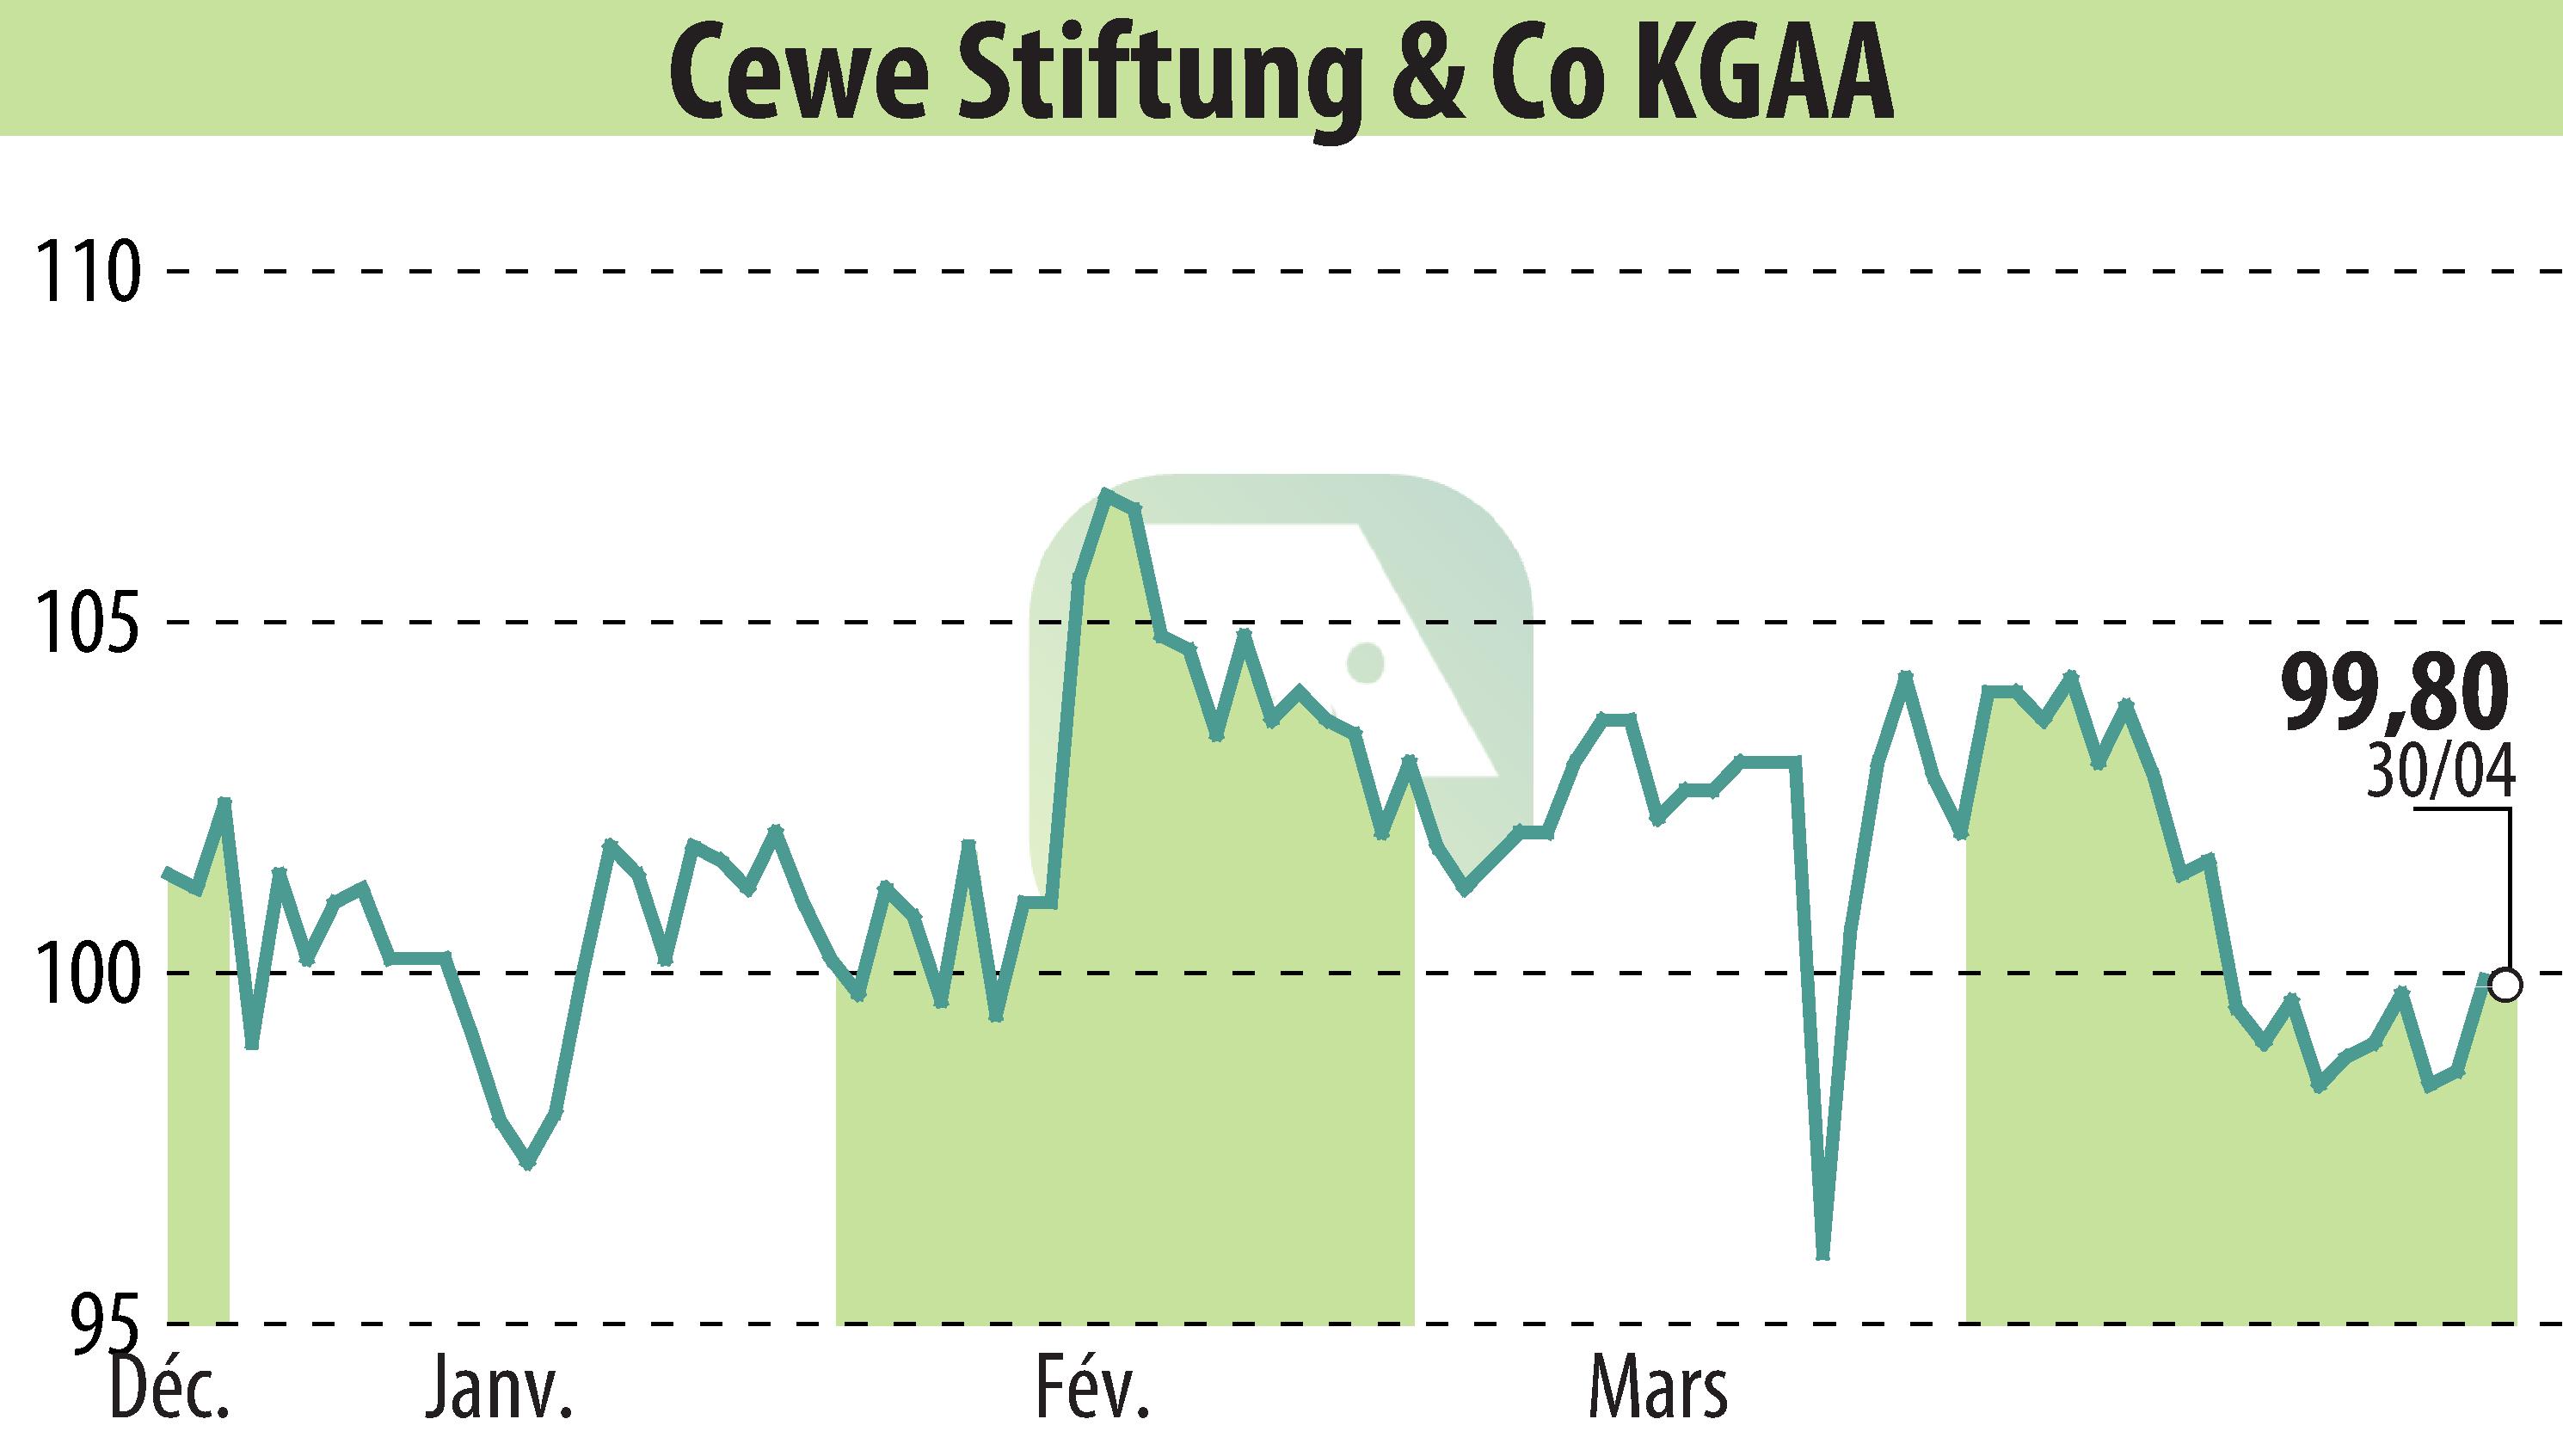 Stock price chart of CEWE Stiftung & Co. KGaA (EBR:CWC) showing fluctuations.